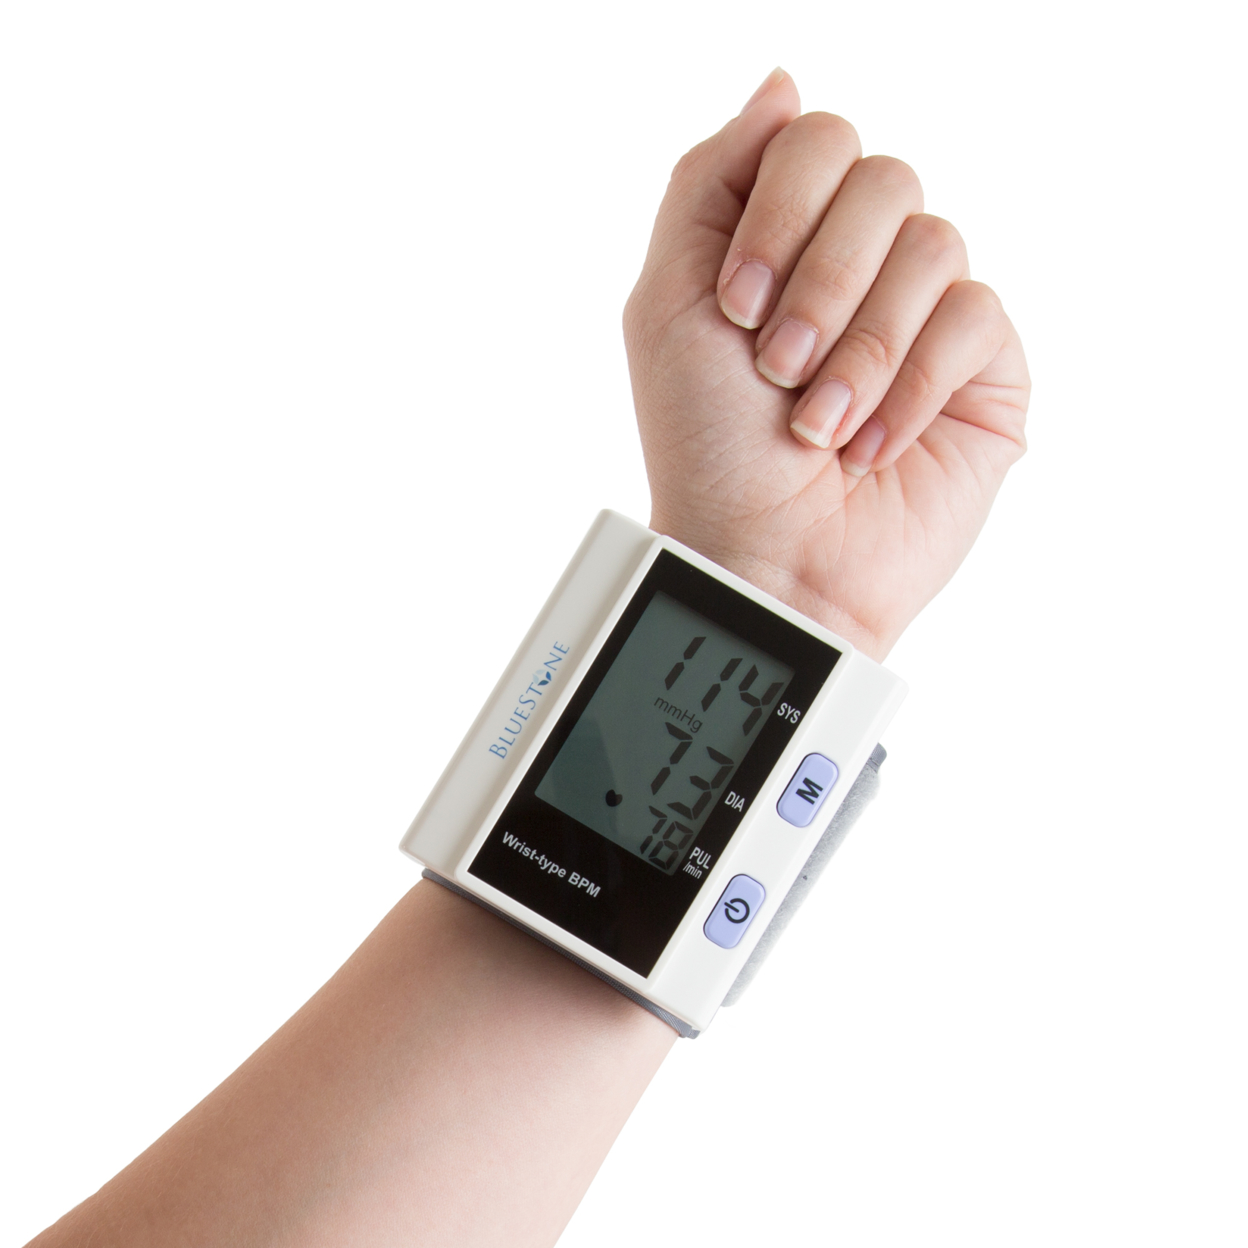 Bluestone Automatic Wrist Blood Pressure And Pulse Monitor With Memory In Case